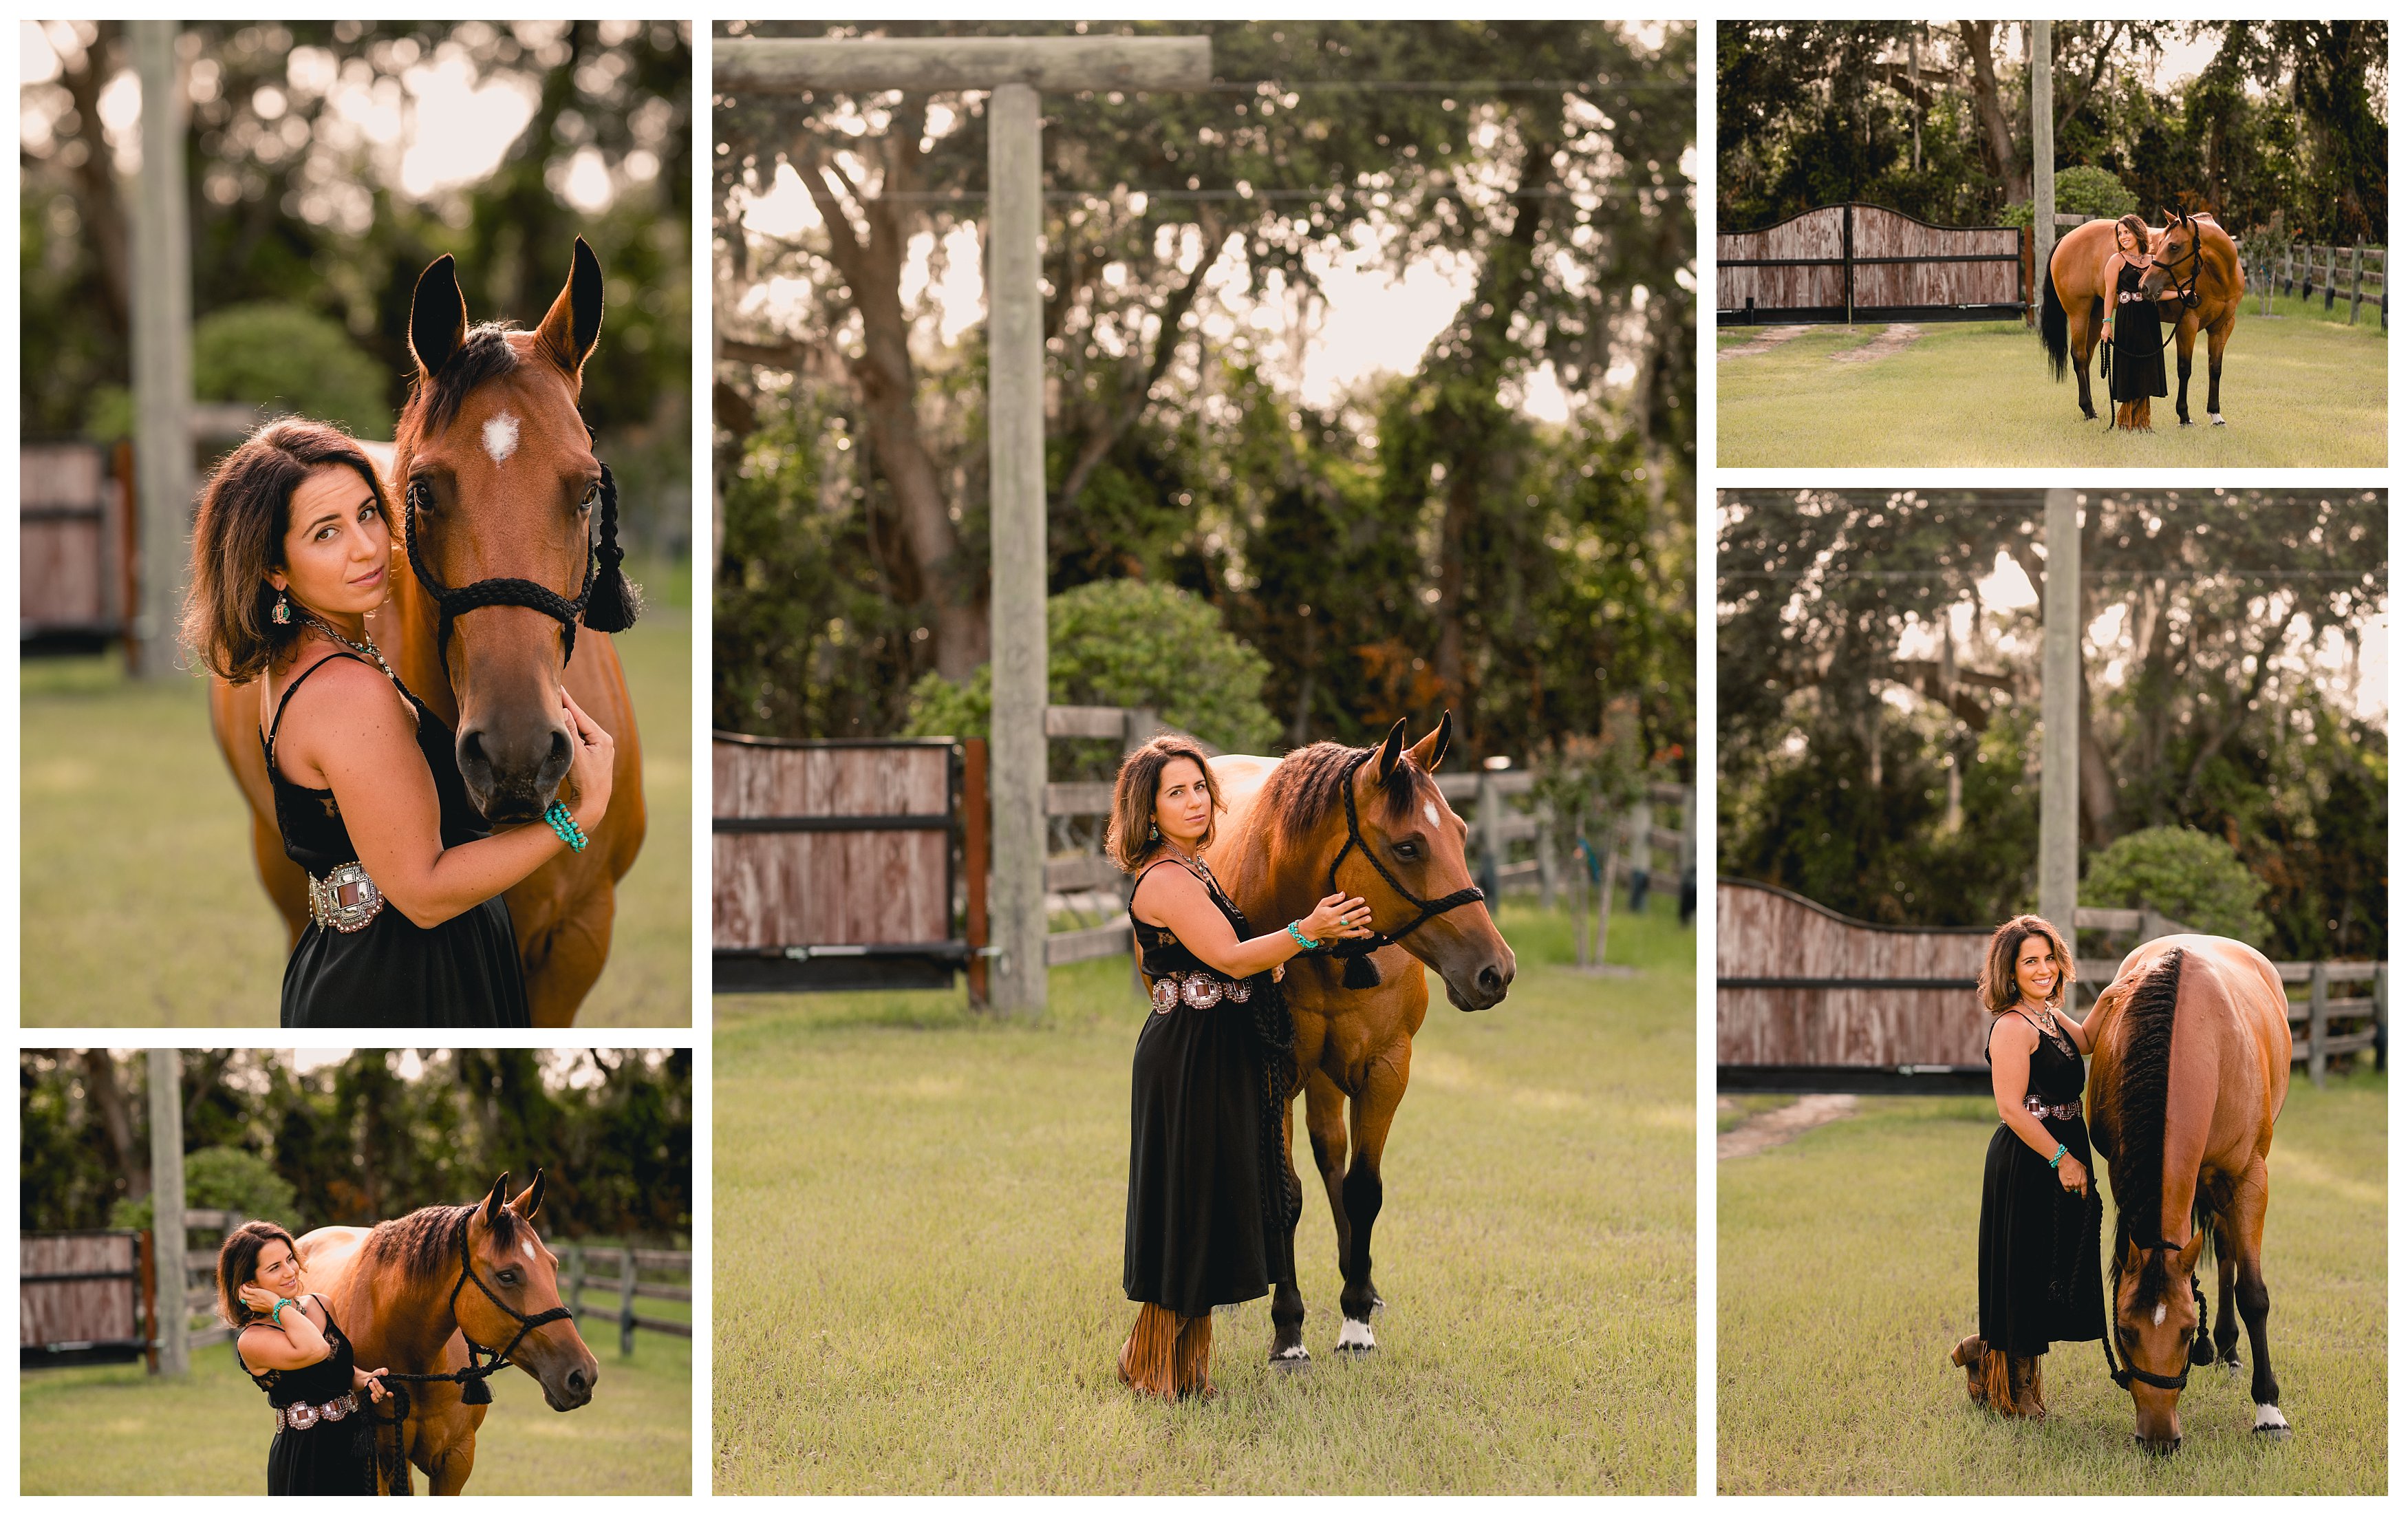 Woman with her reining mare in Gainesville, FL wearing western black dress and boots.